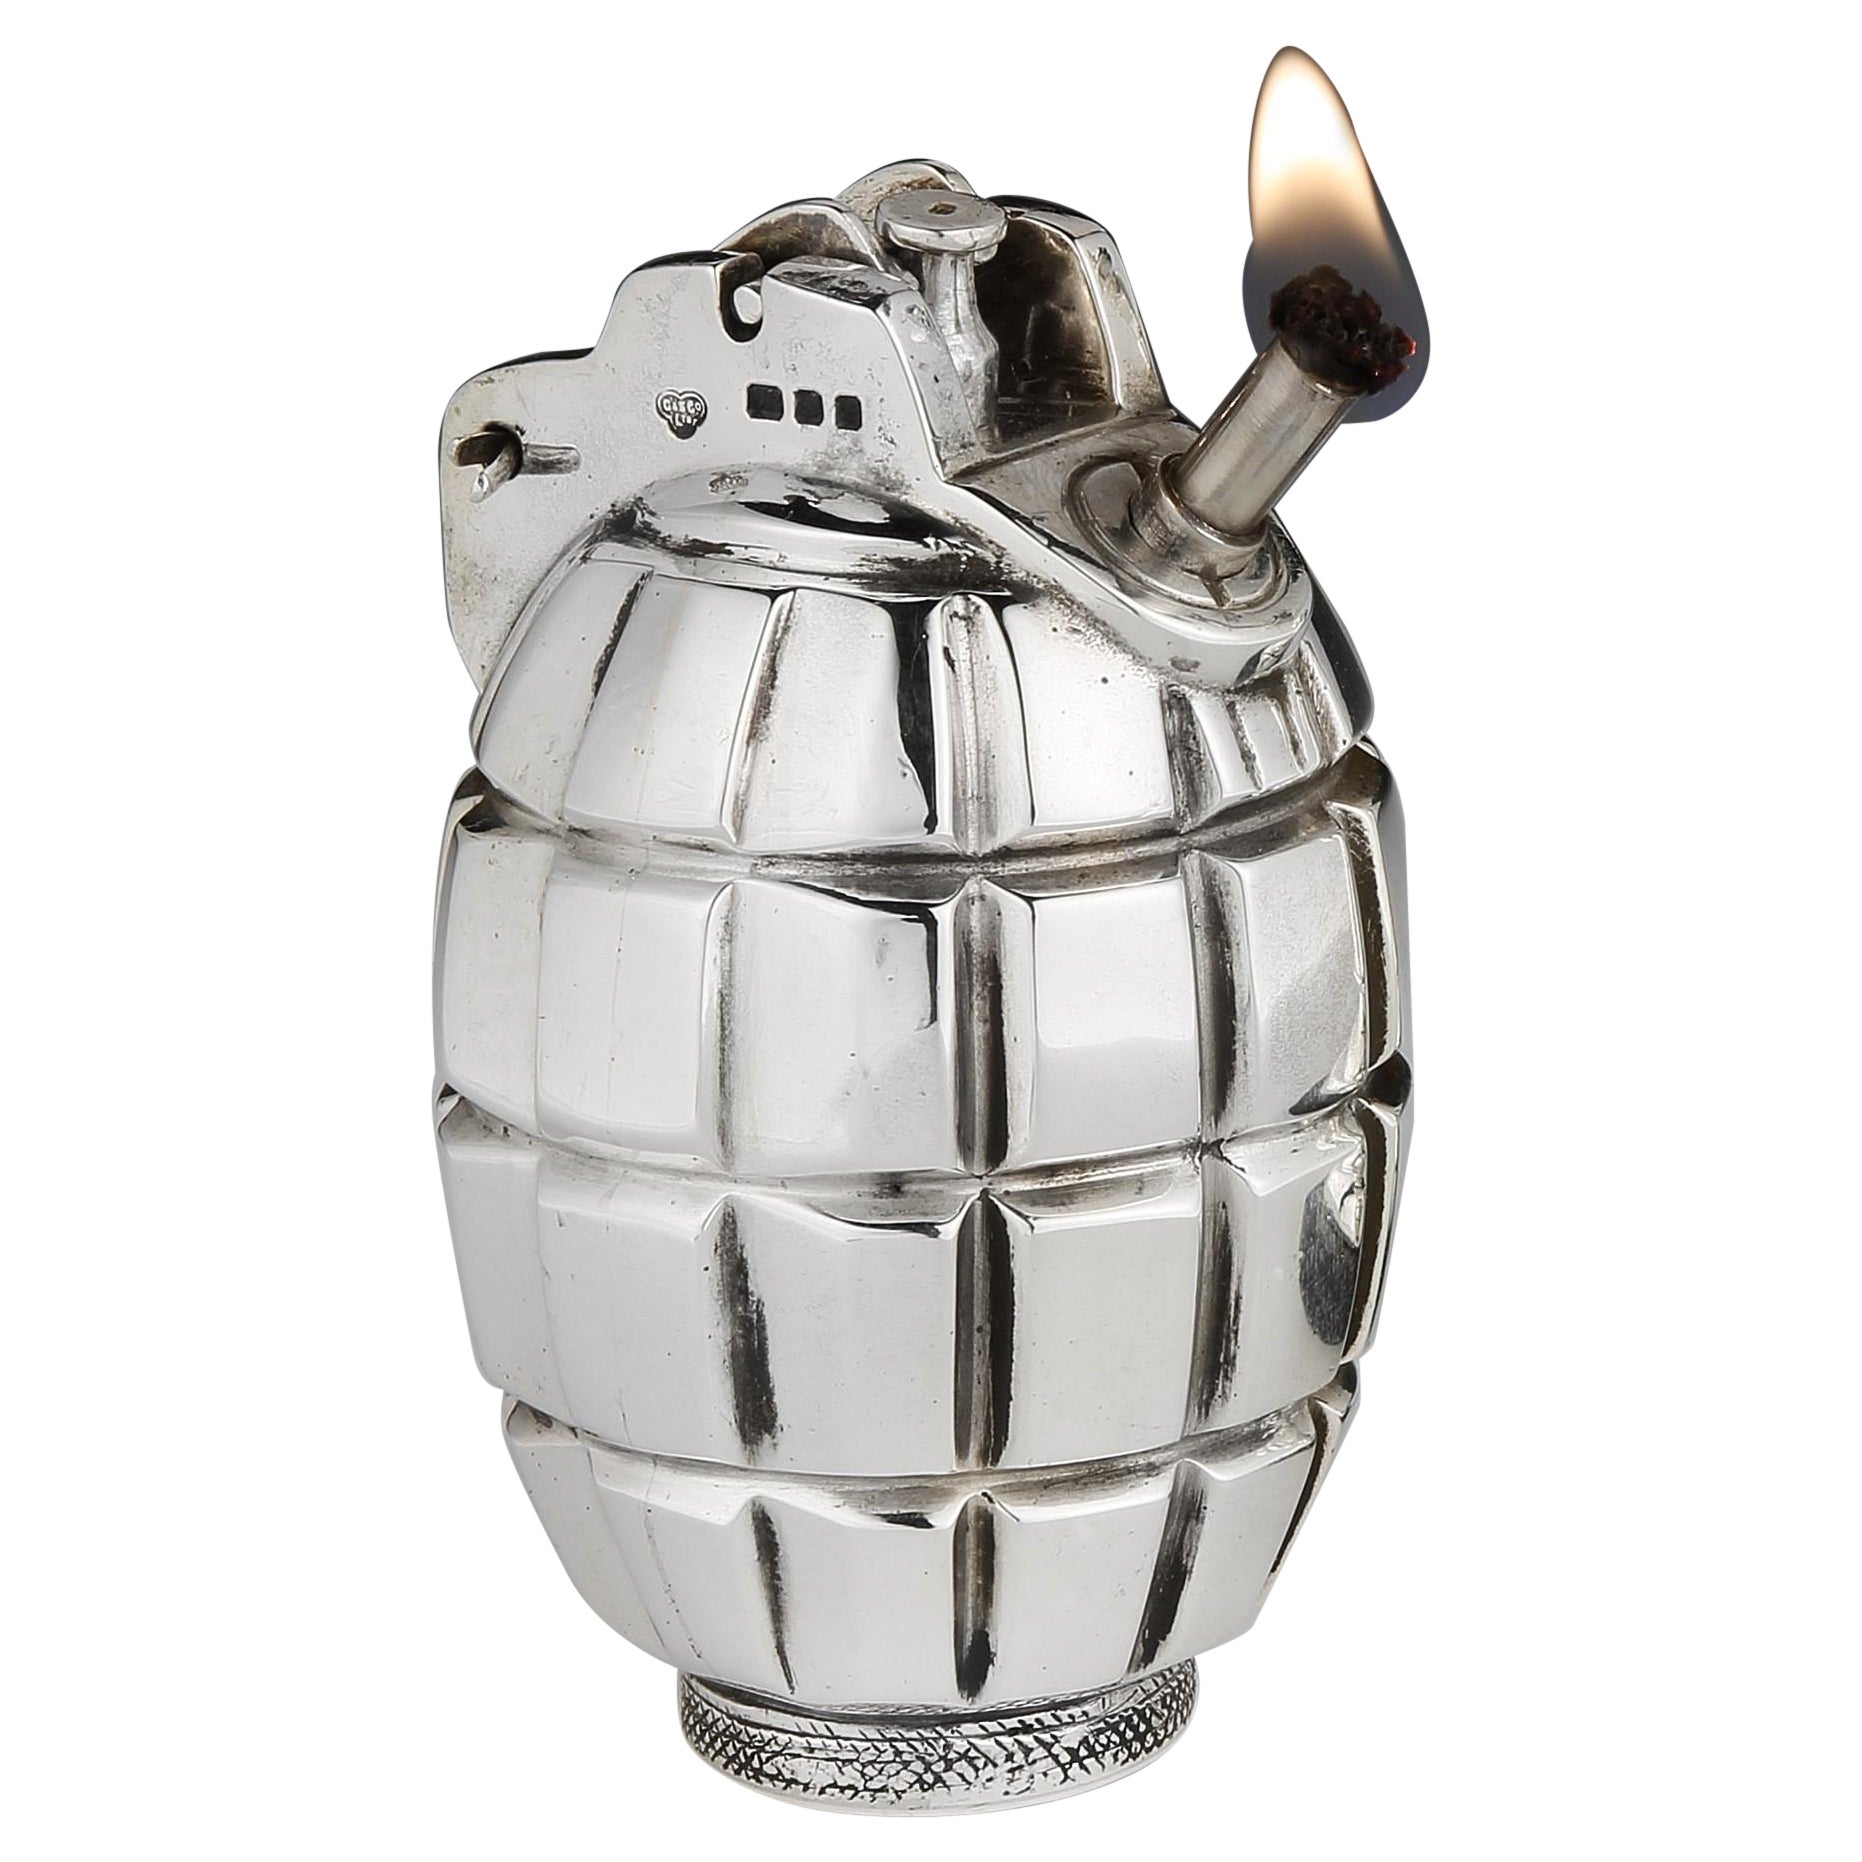 1941 Sterling Silver 'Grenade' Table Lighter by Goldsmiths & Silversmiths Co.